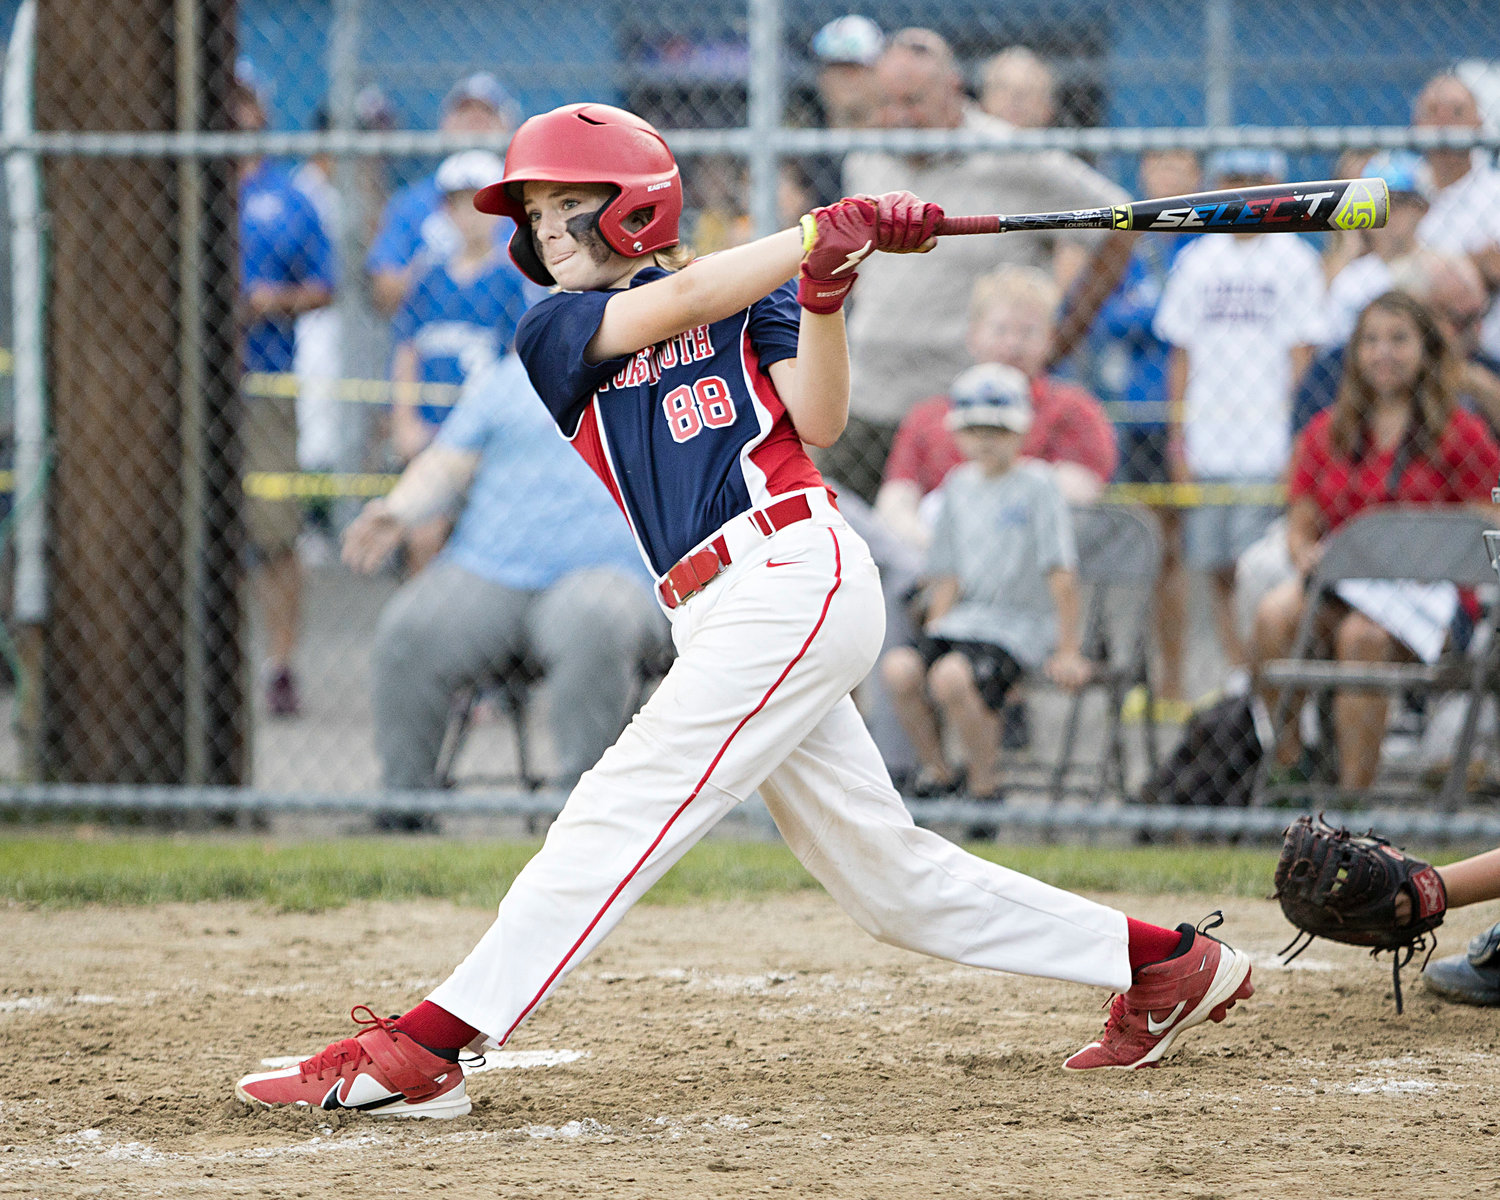 Tyler Doucet follows through with a swing while competing against Cumberland.